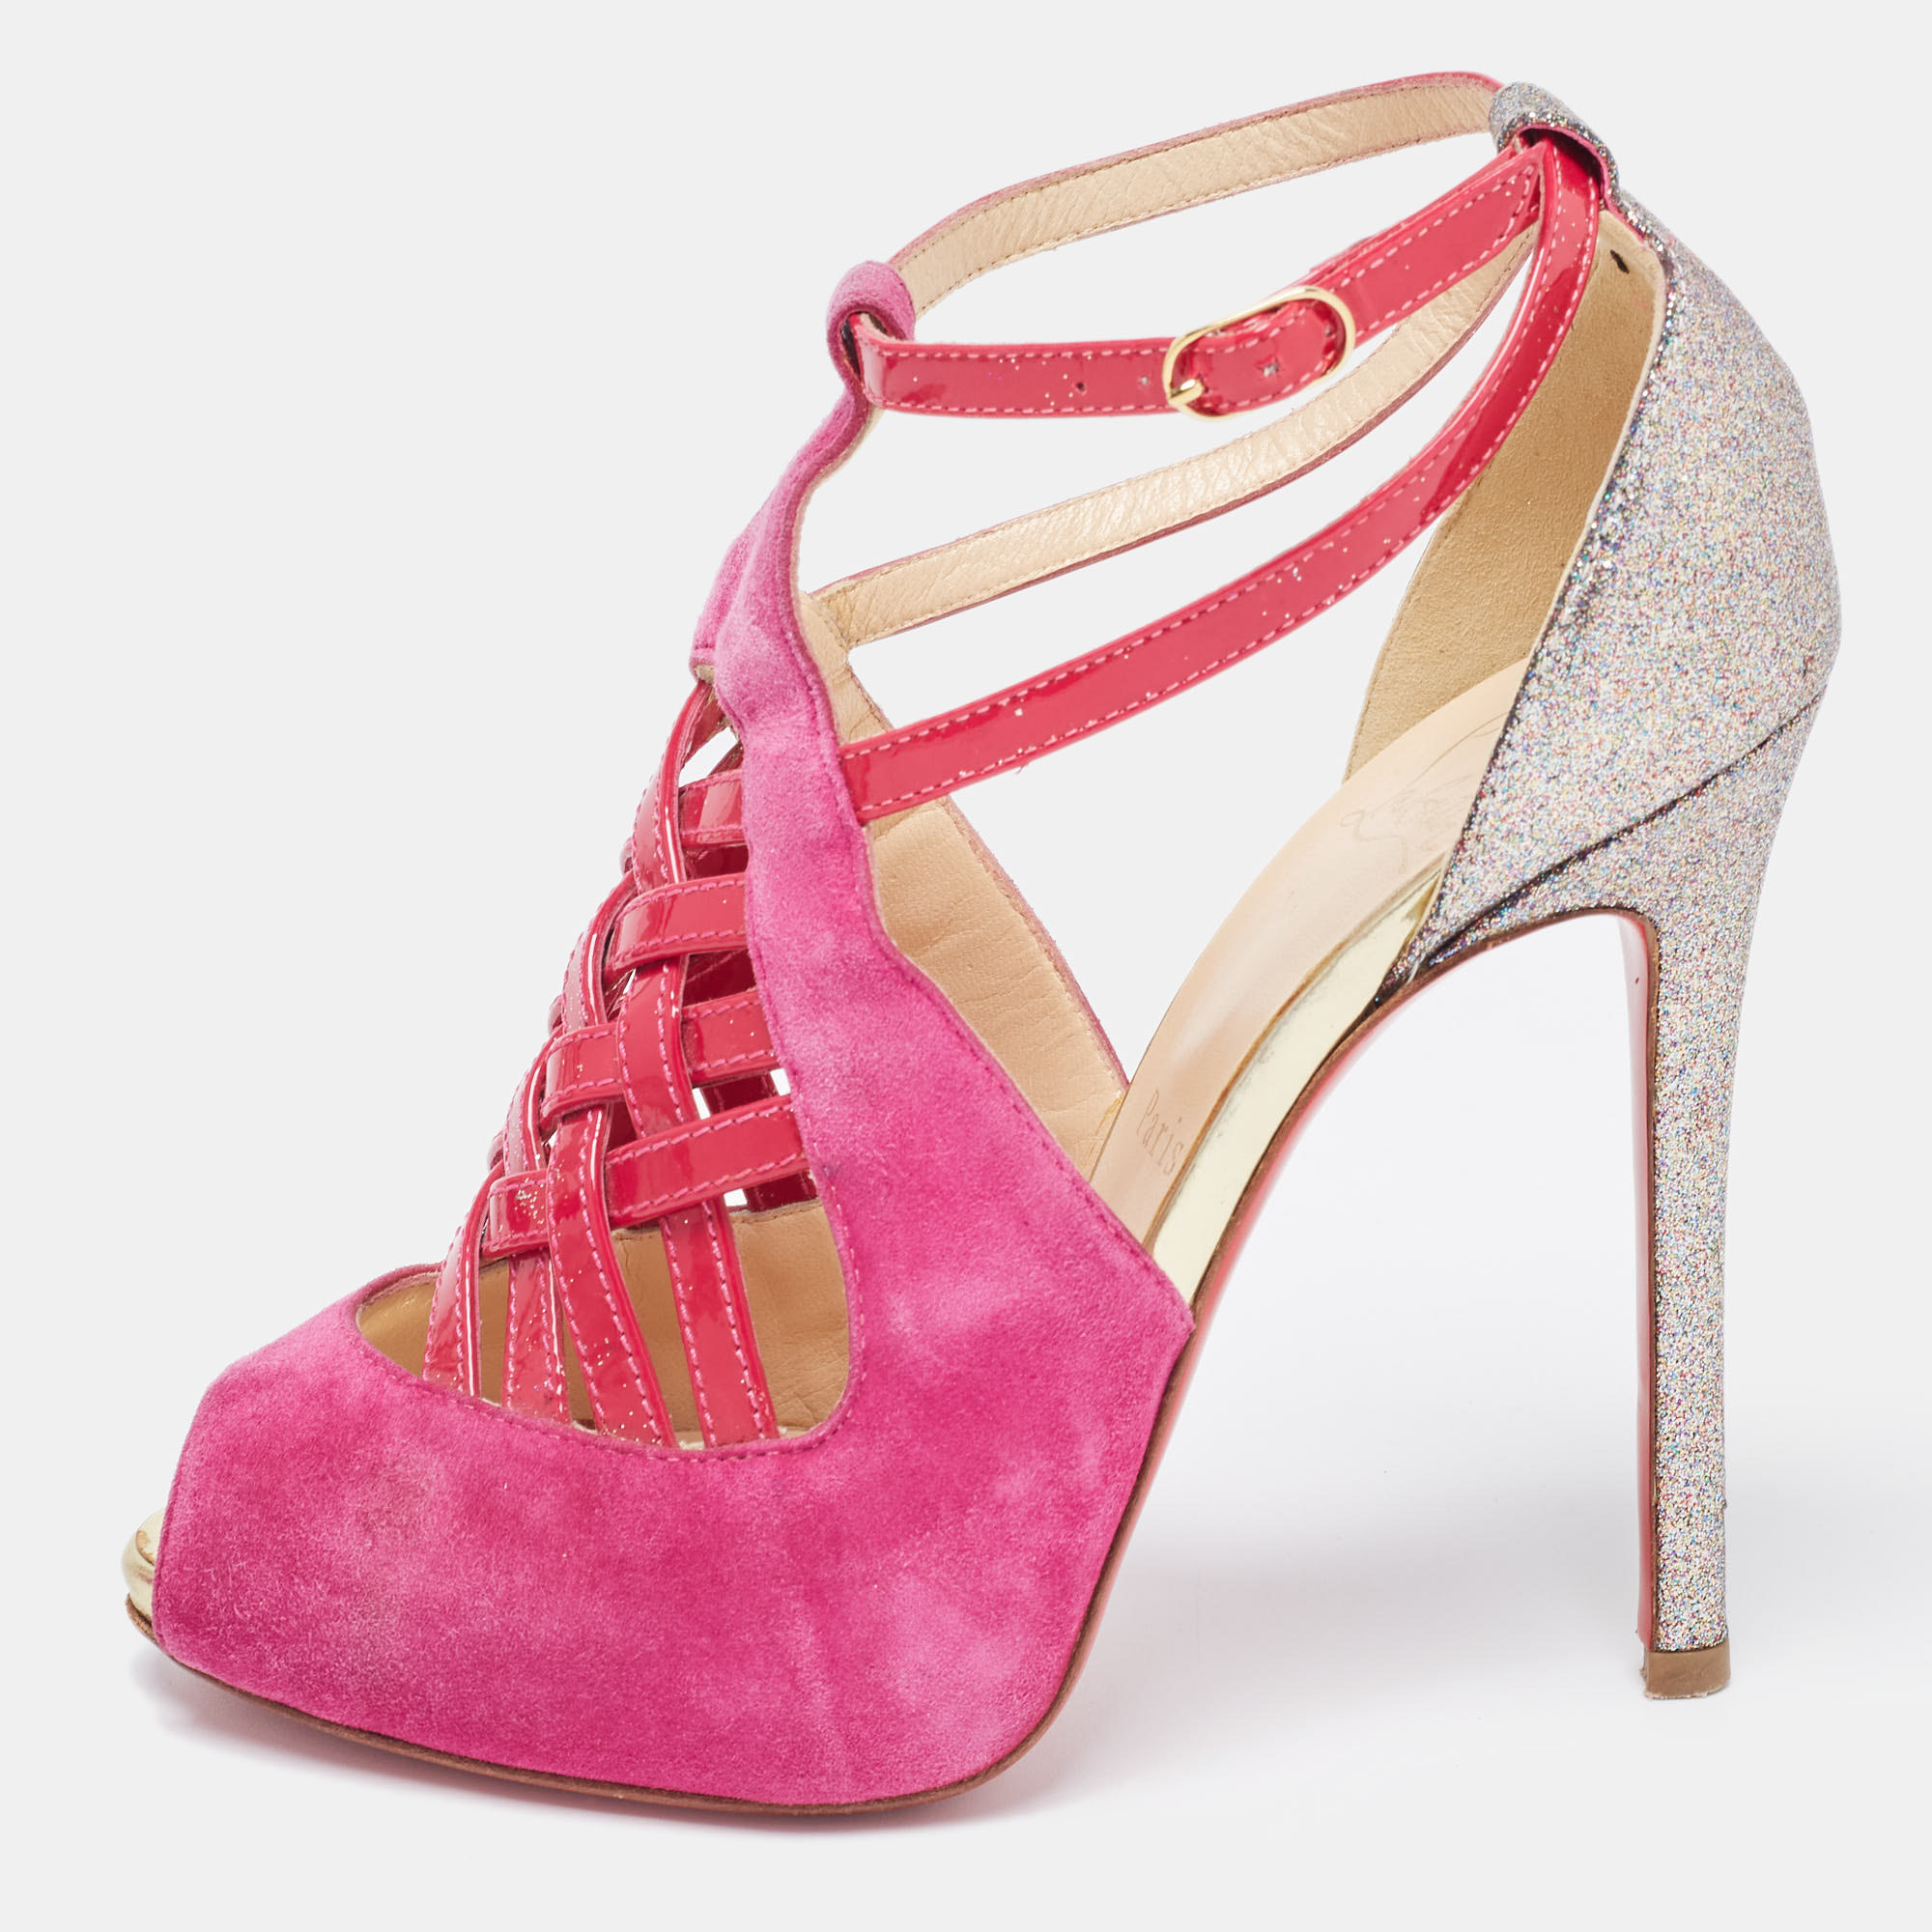 Pre-owned Christian Louboutin Pink/metallic Bronze Suede And Leather Ankle Strap Sandals Size 37